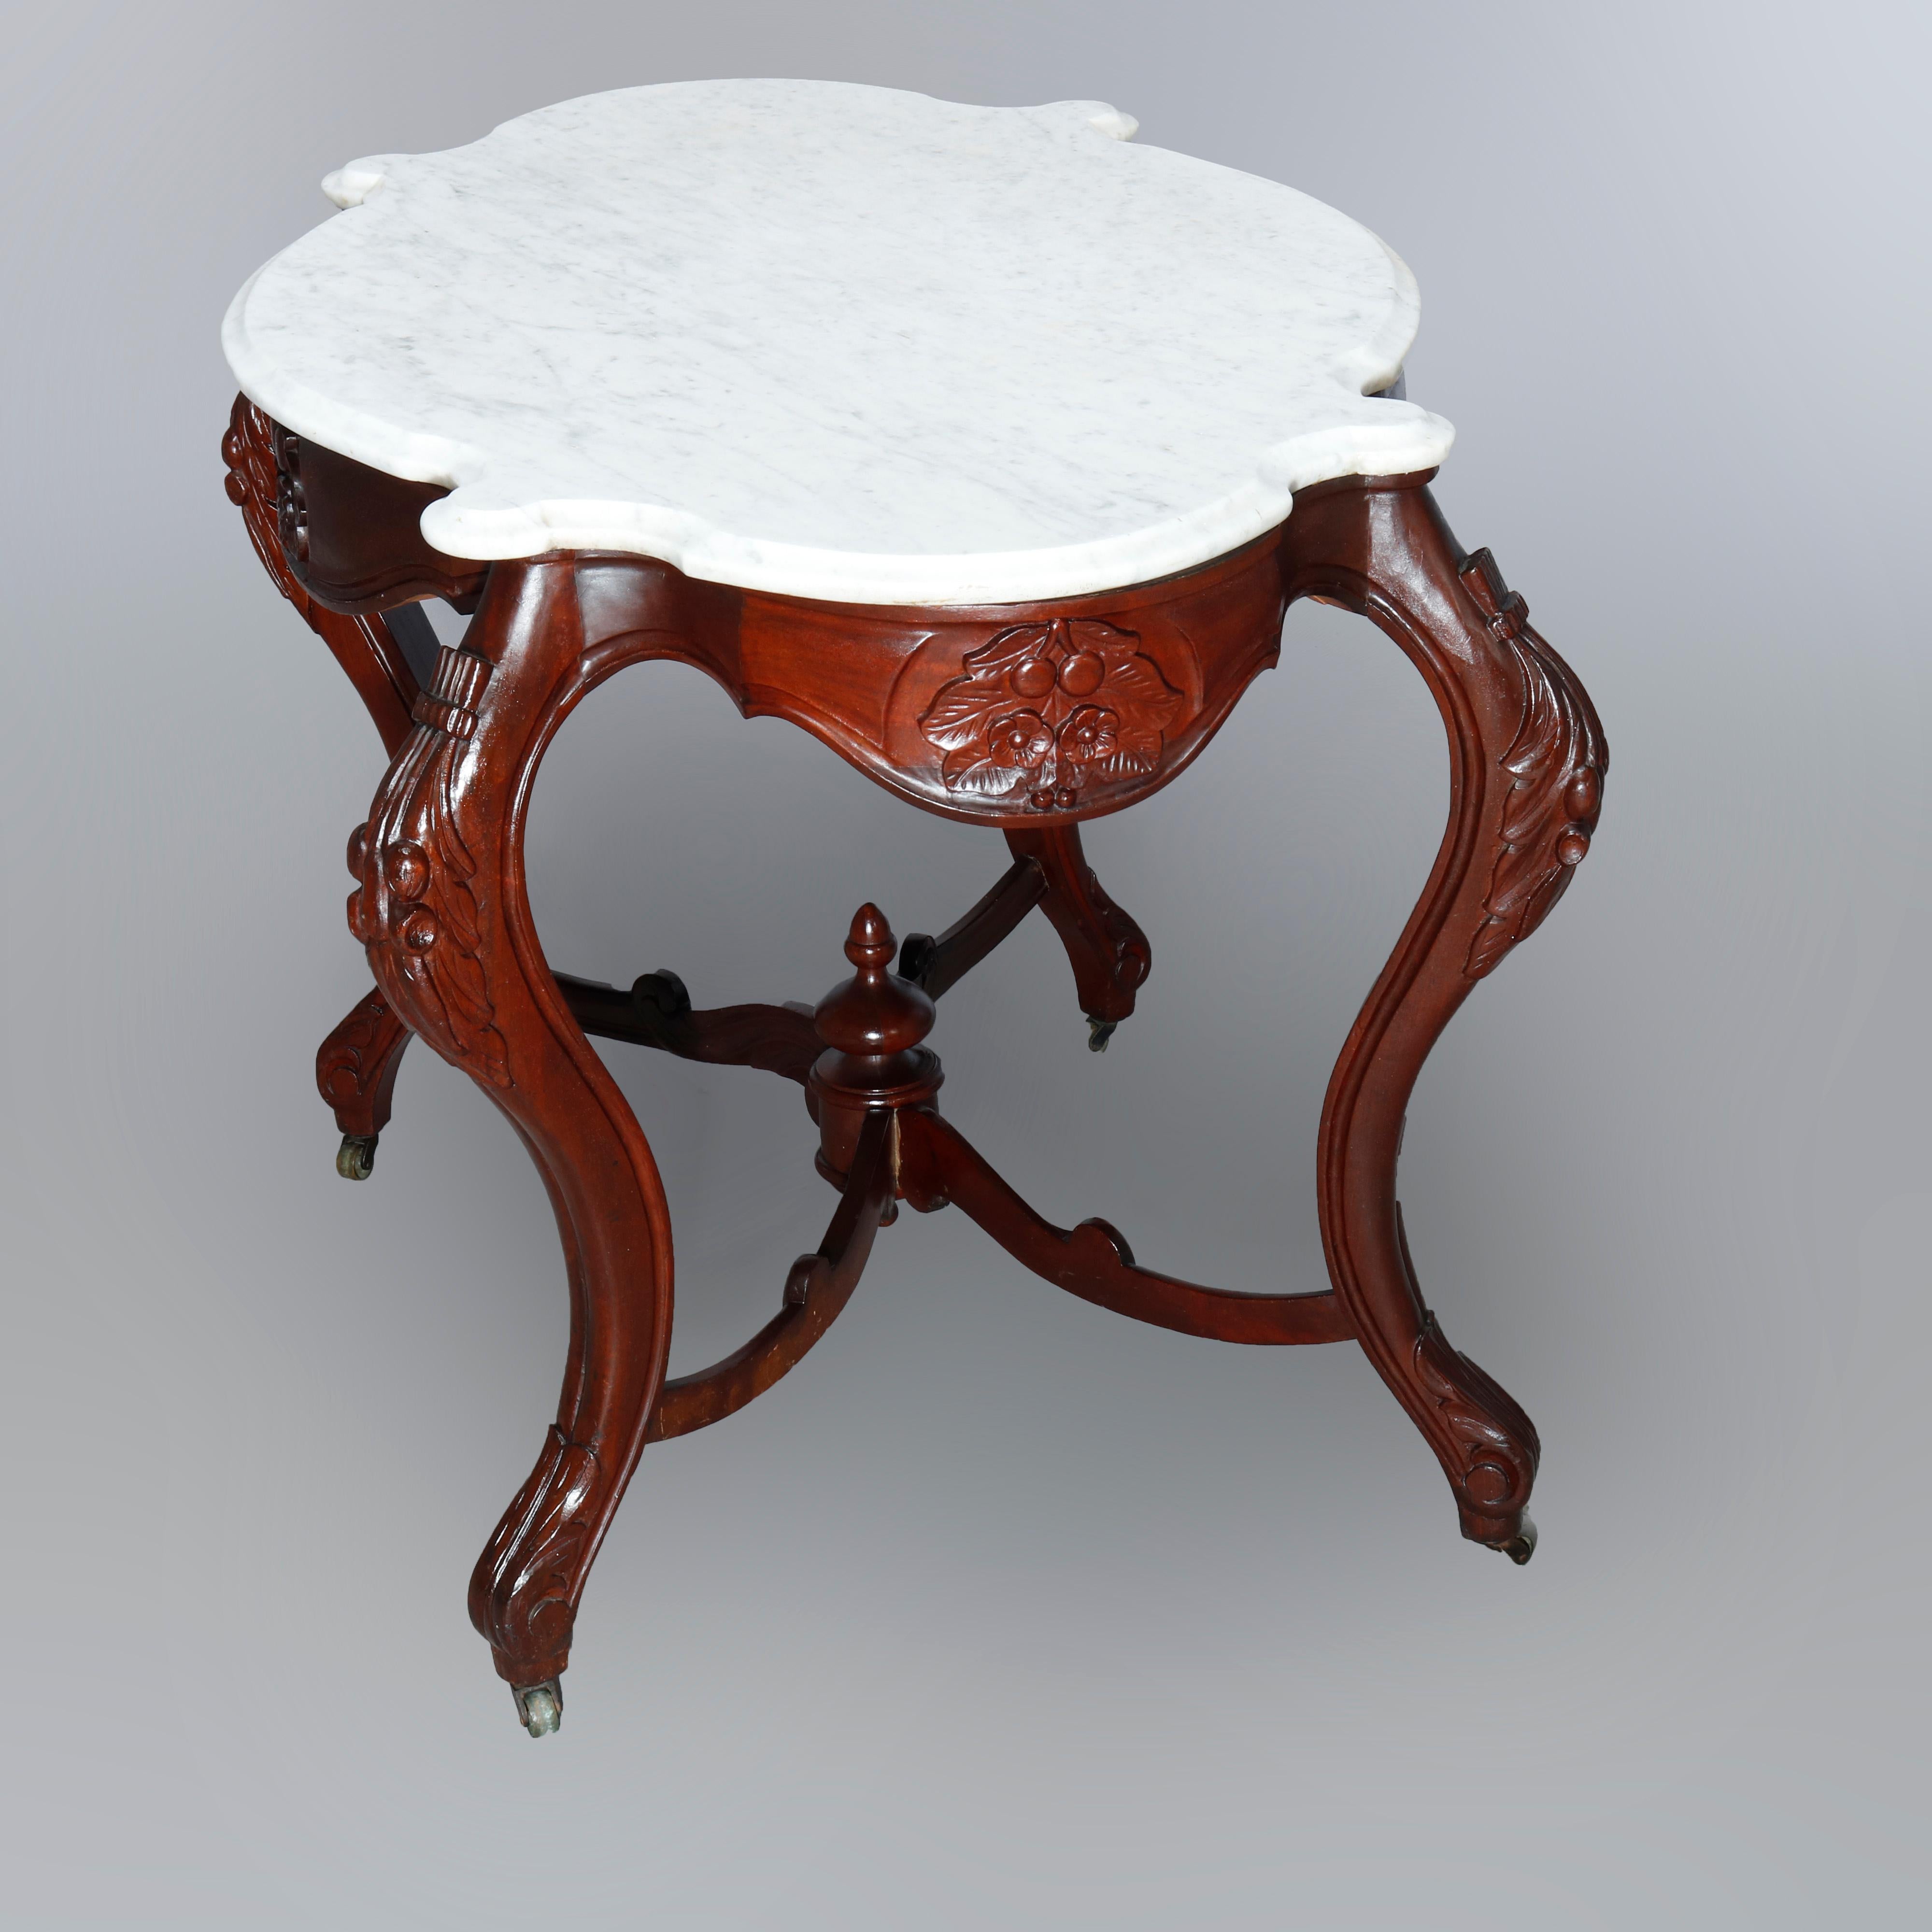 Antique Rococo Revival Turtle Top Carved Walnut & Marble Center Table, c1870 4